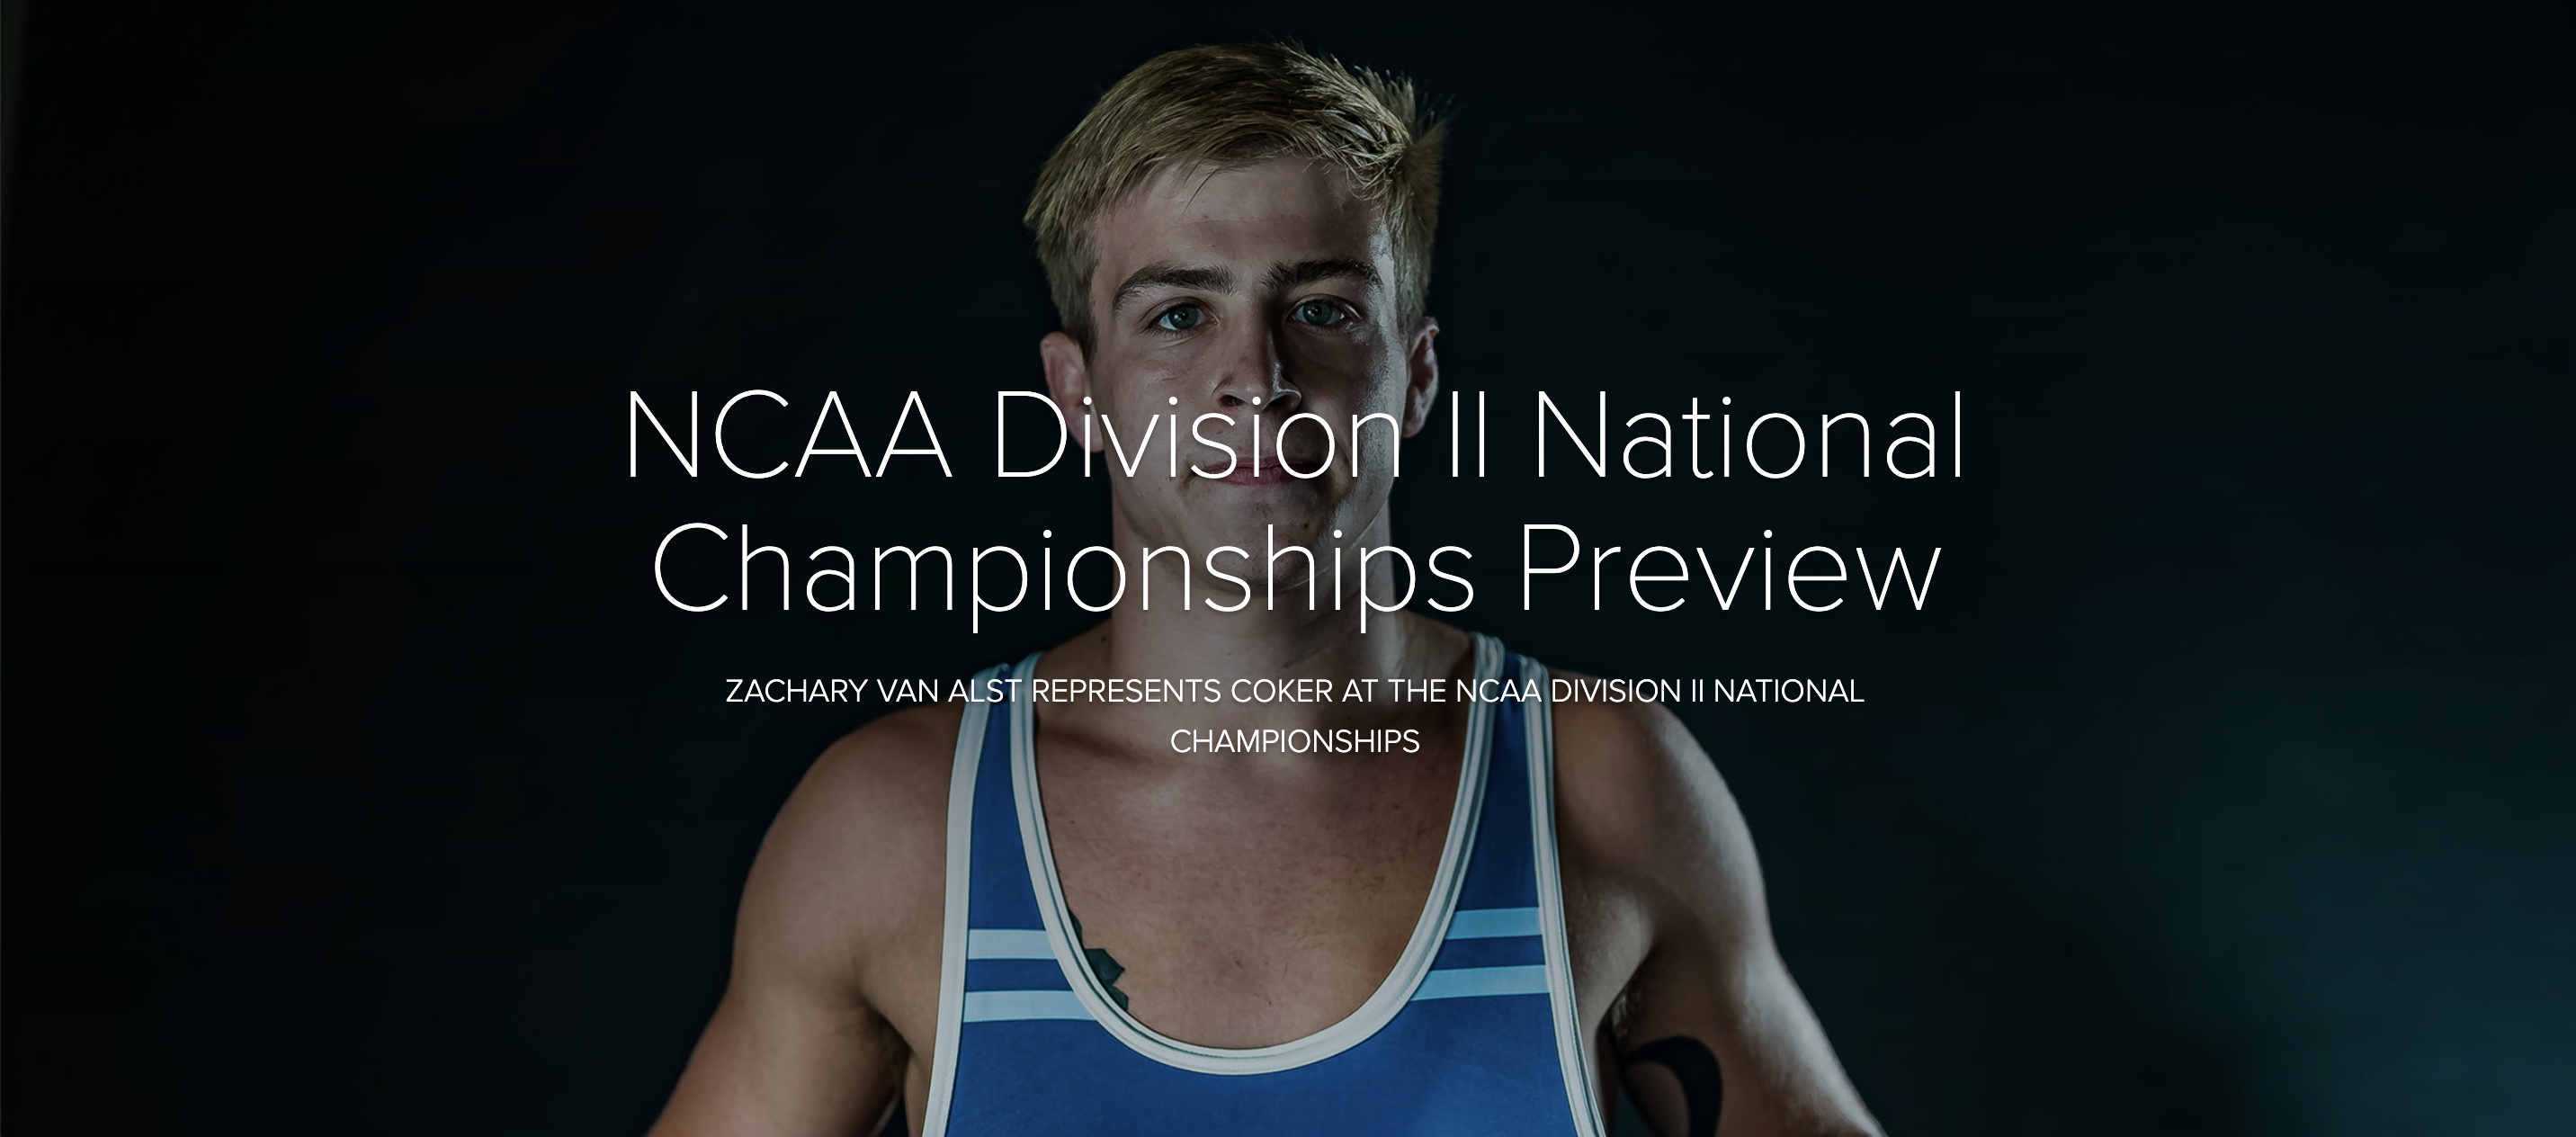 Van Alst Ready to Represent Coker at the NCAA Division II National Championships